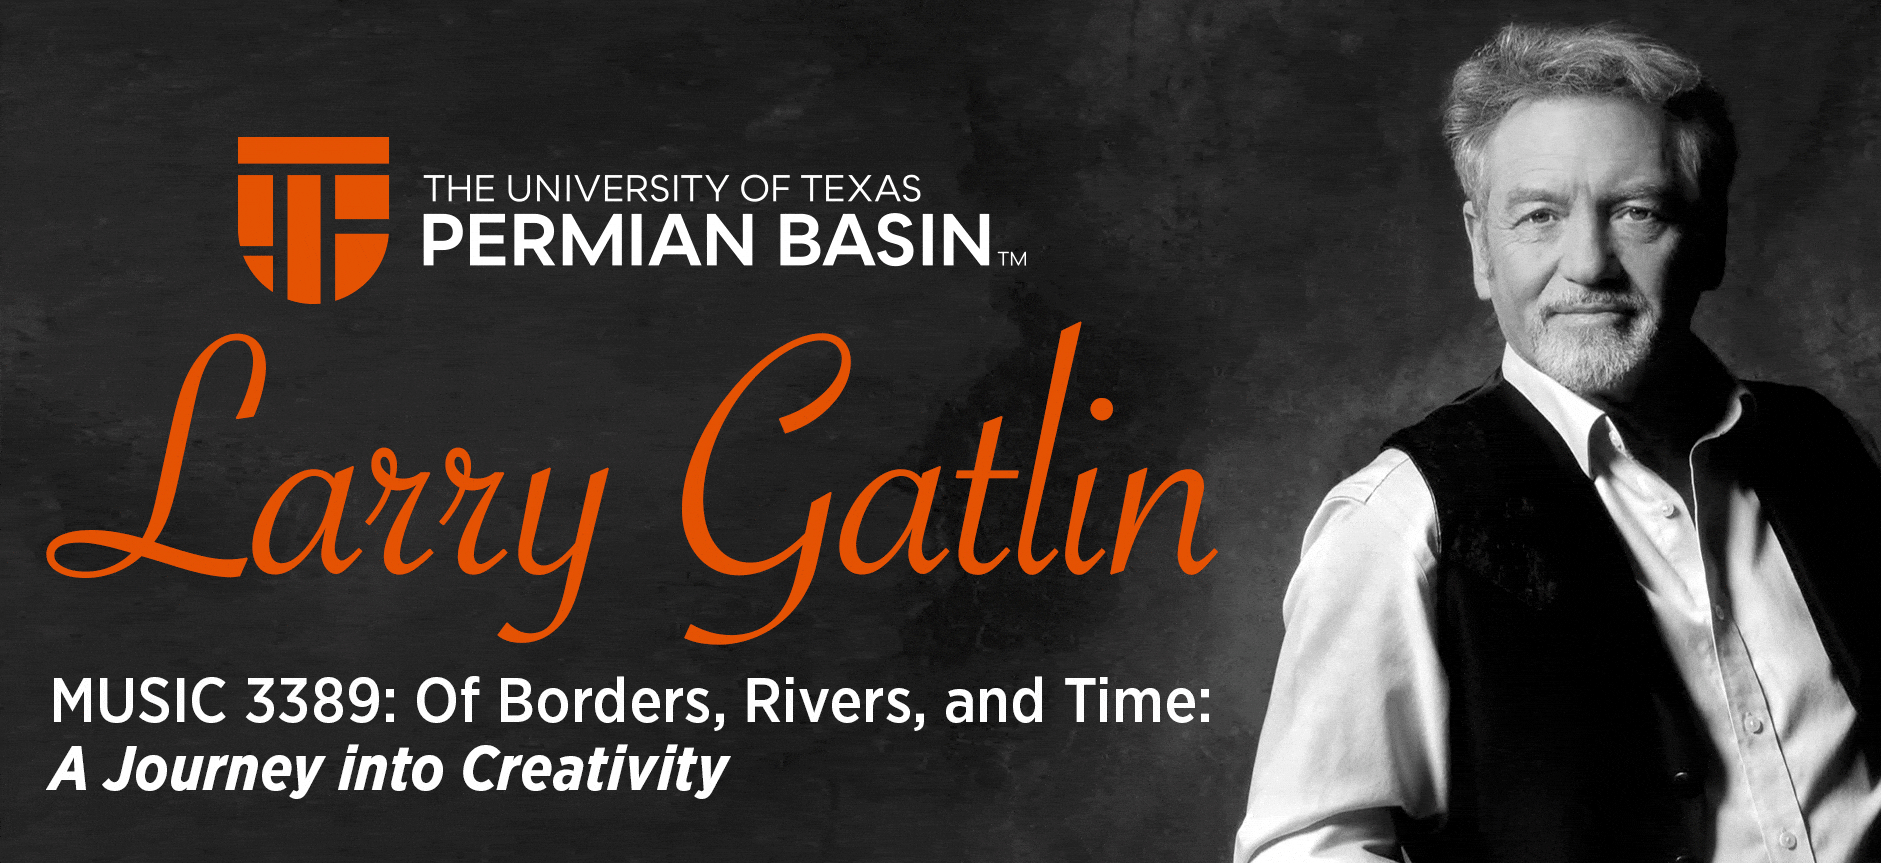 Larry Gatlin - Music 3389: Of Borders, Rivers, and Time: A journey into Creativity